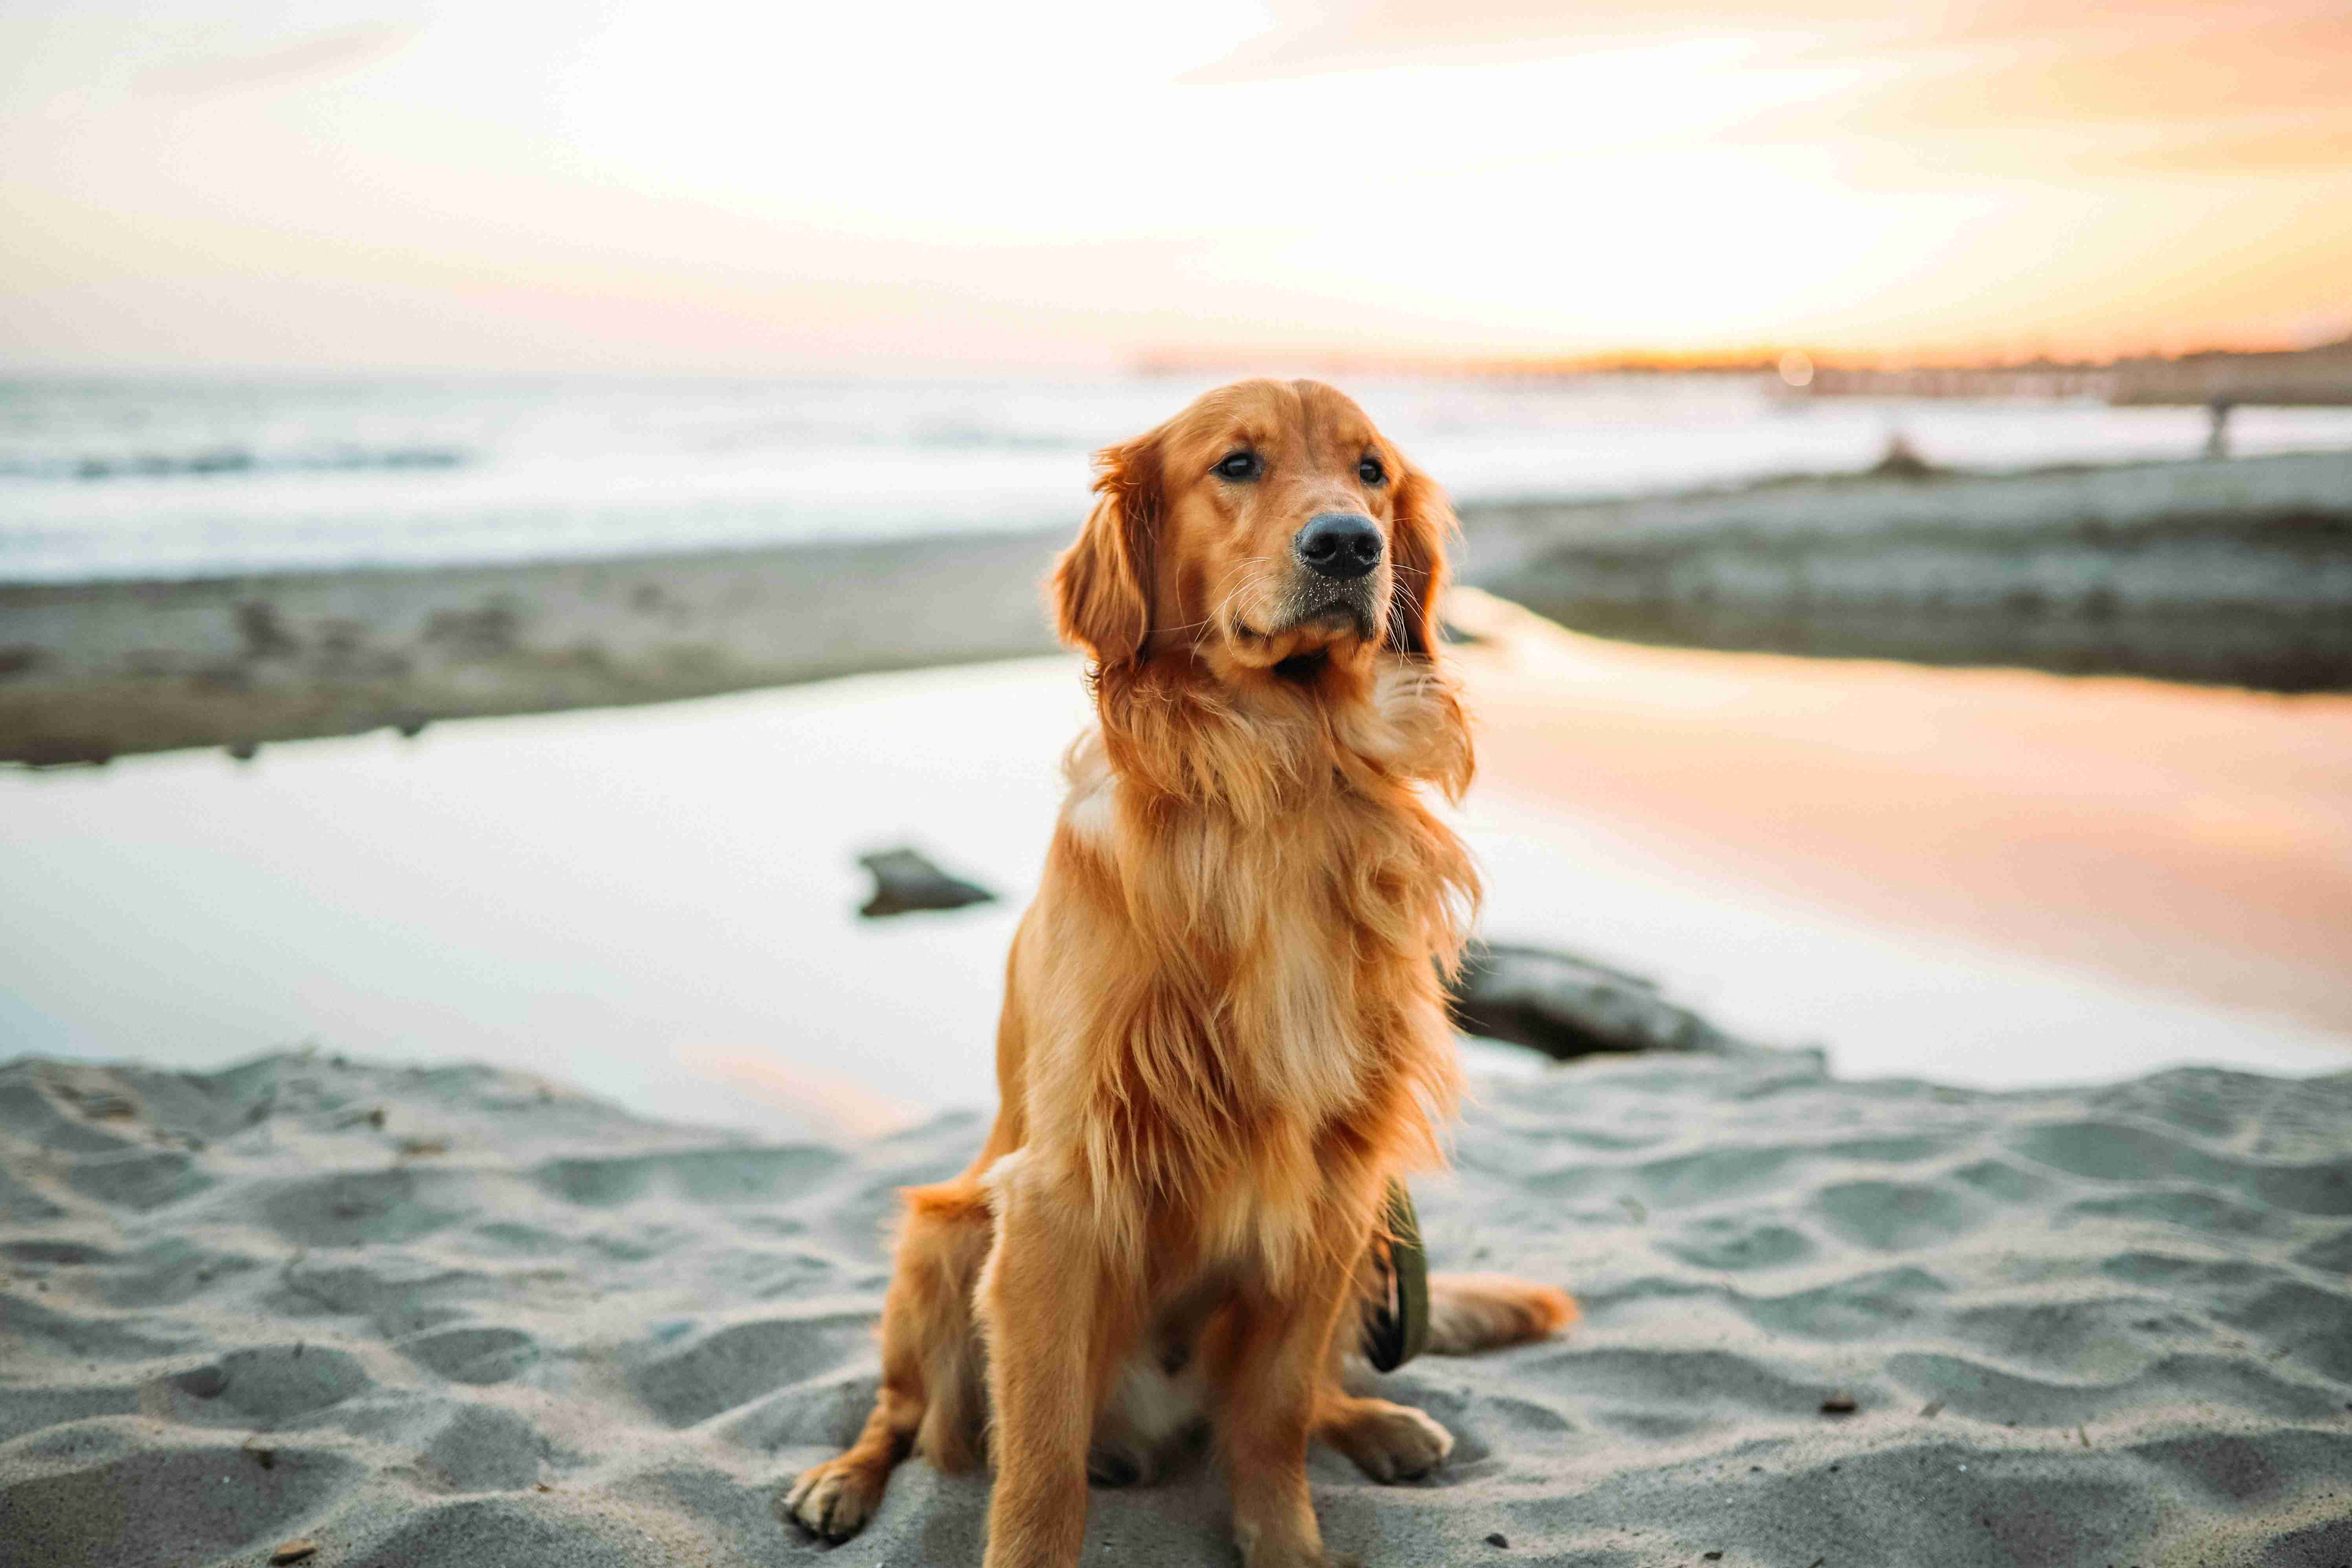 What are some effective training techniques for Golden Retrievers?